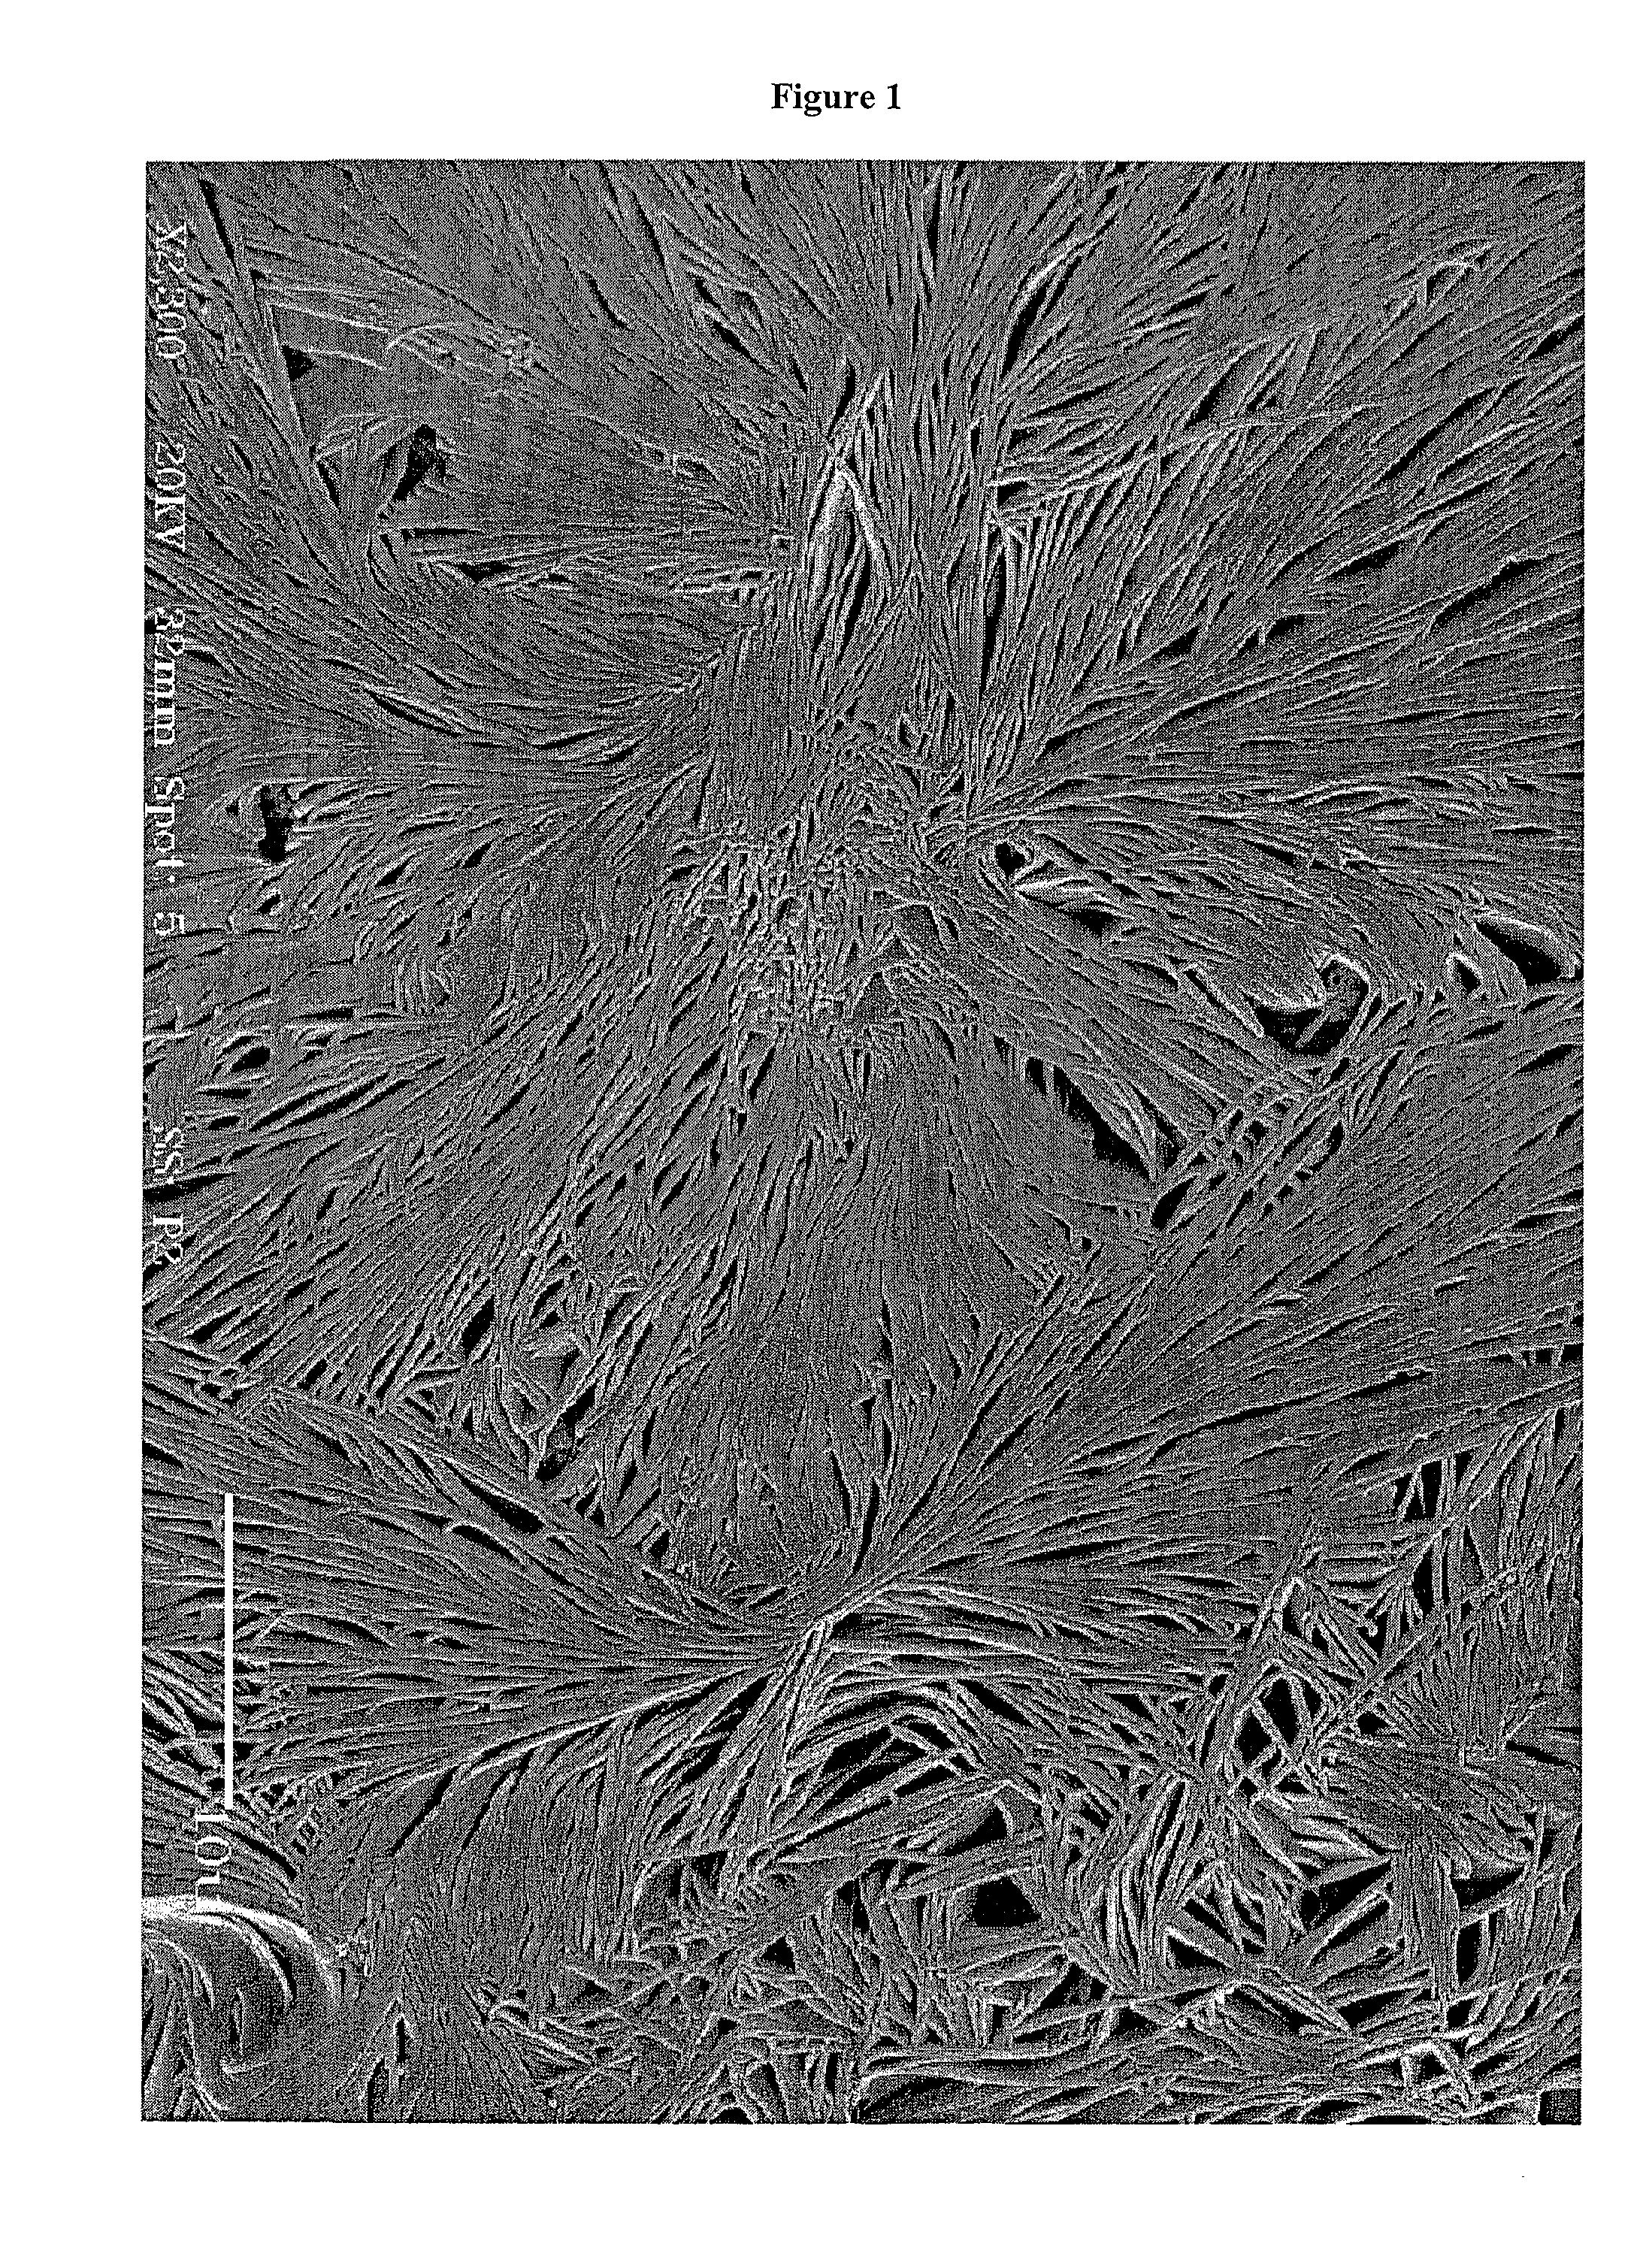 Method of making dendritic magnetic nanostructures